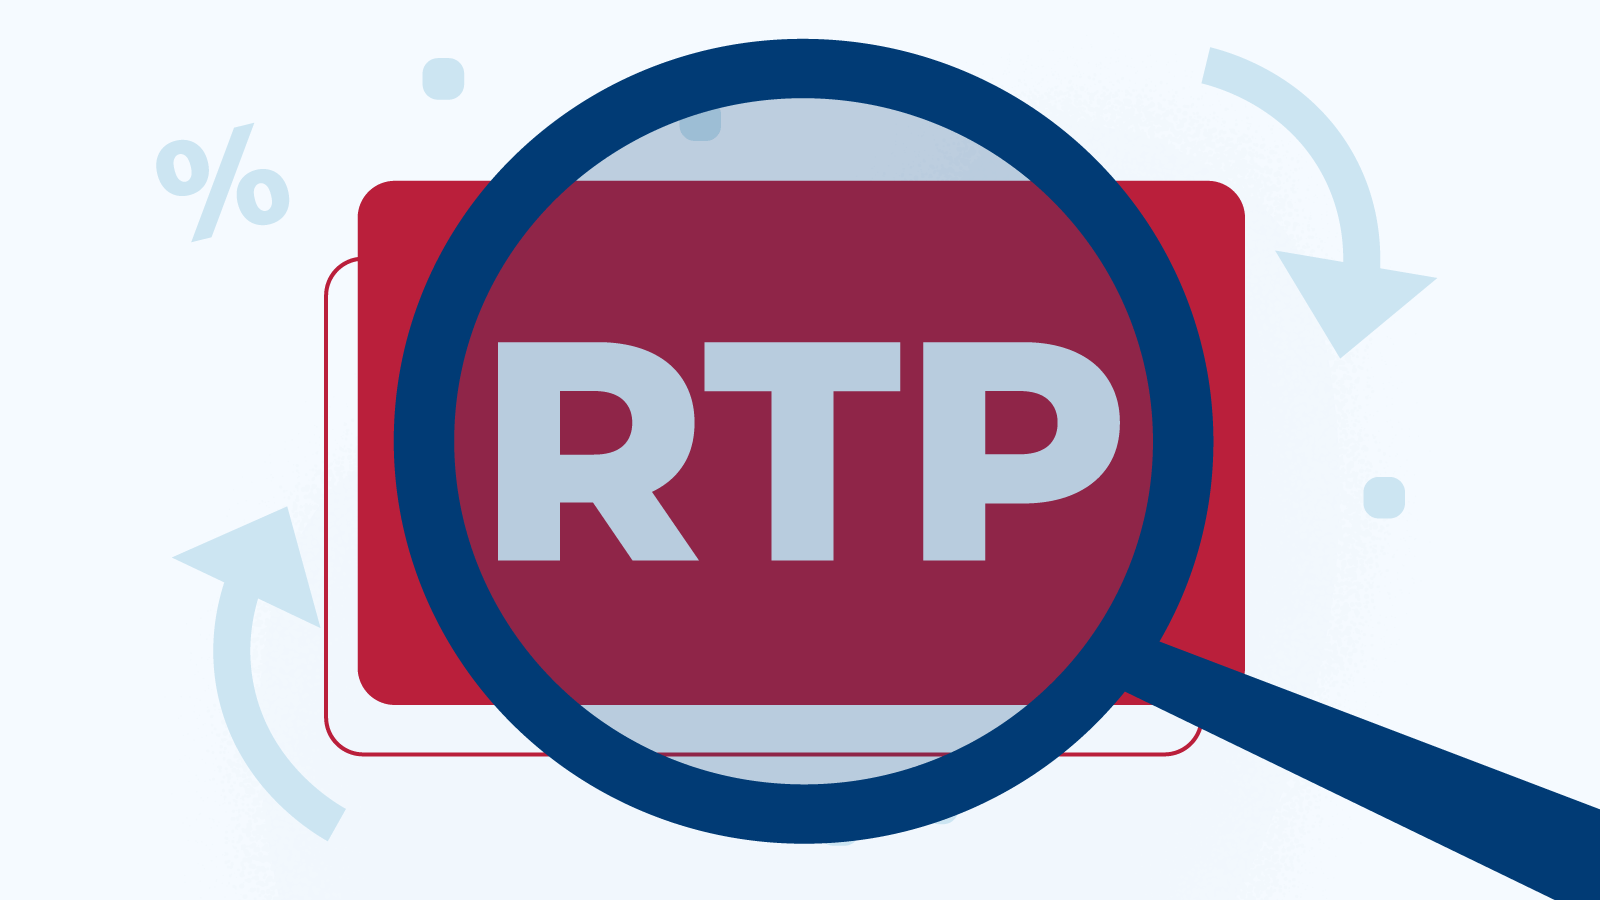 3. Where can you find the RTP listings